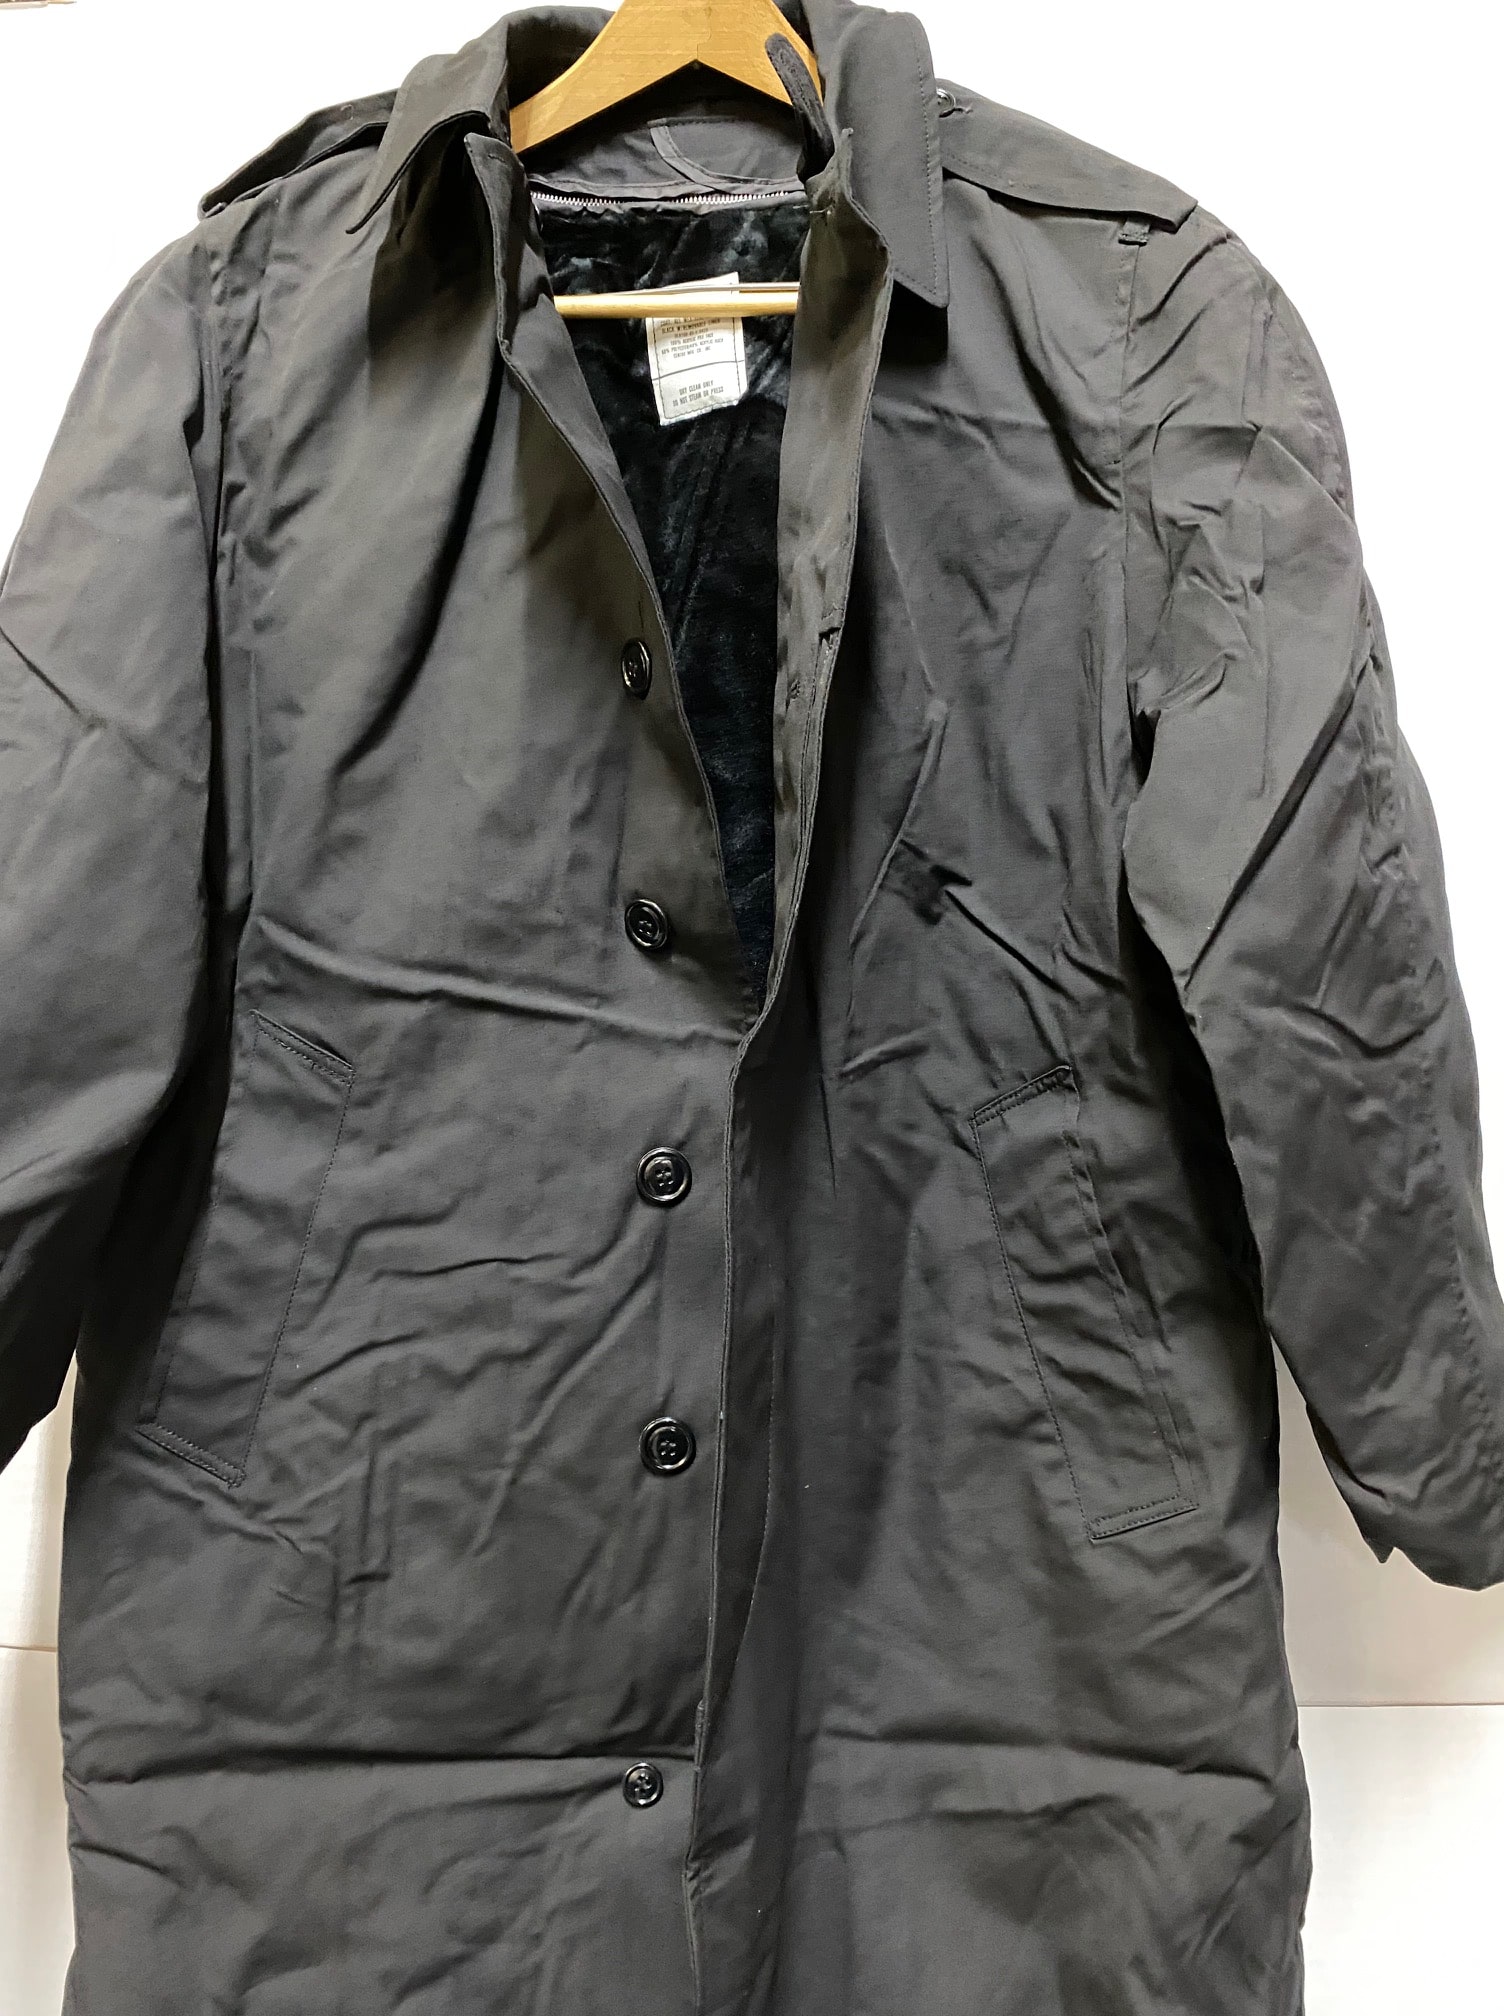 US Army All Weather Coat, 36R